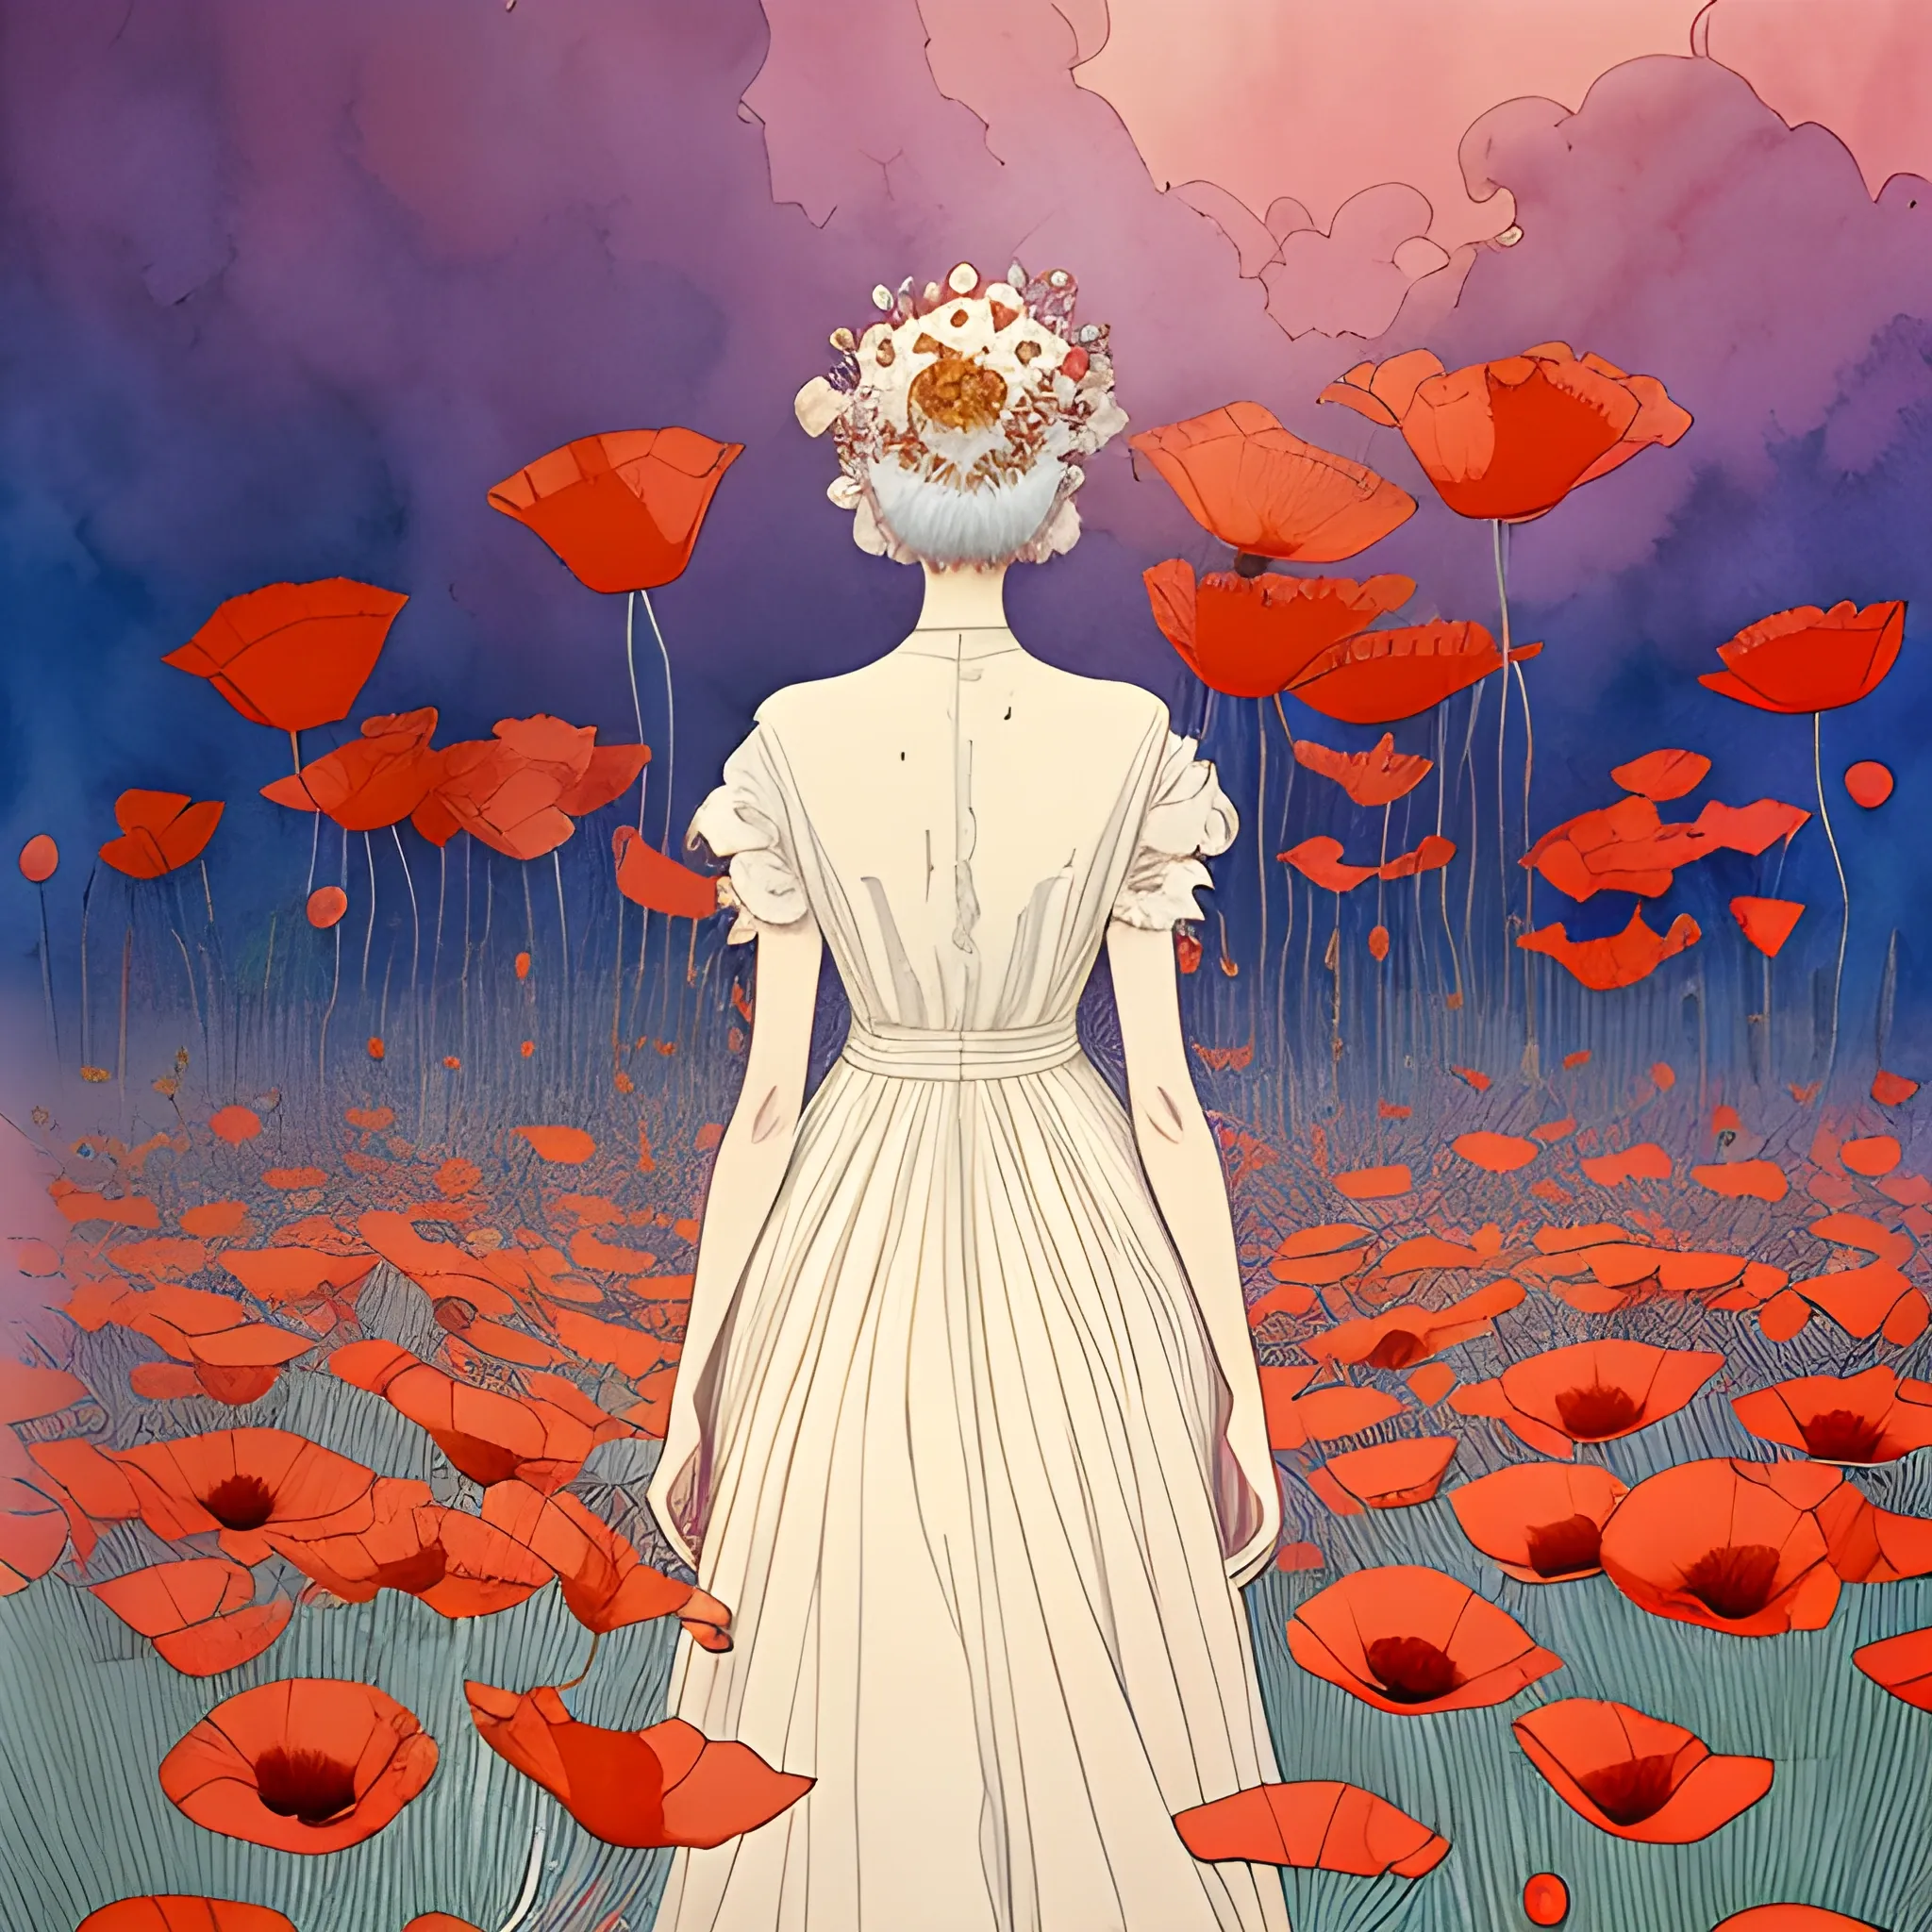 hundreds of giant poppies flower head, woman white dress walking, dramatic light, victo ngai, james jean, moebius style, surreal, dramatic light, inking lines, Water soft Color, Water Color